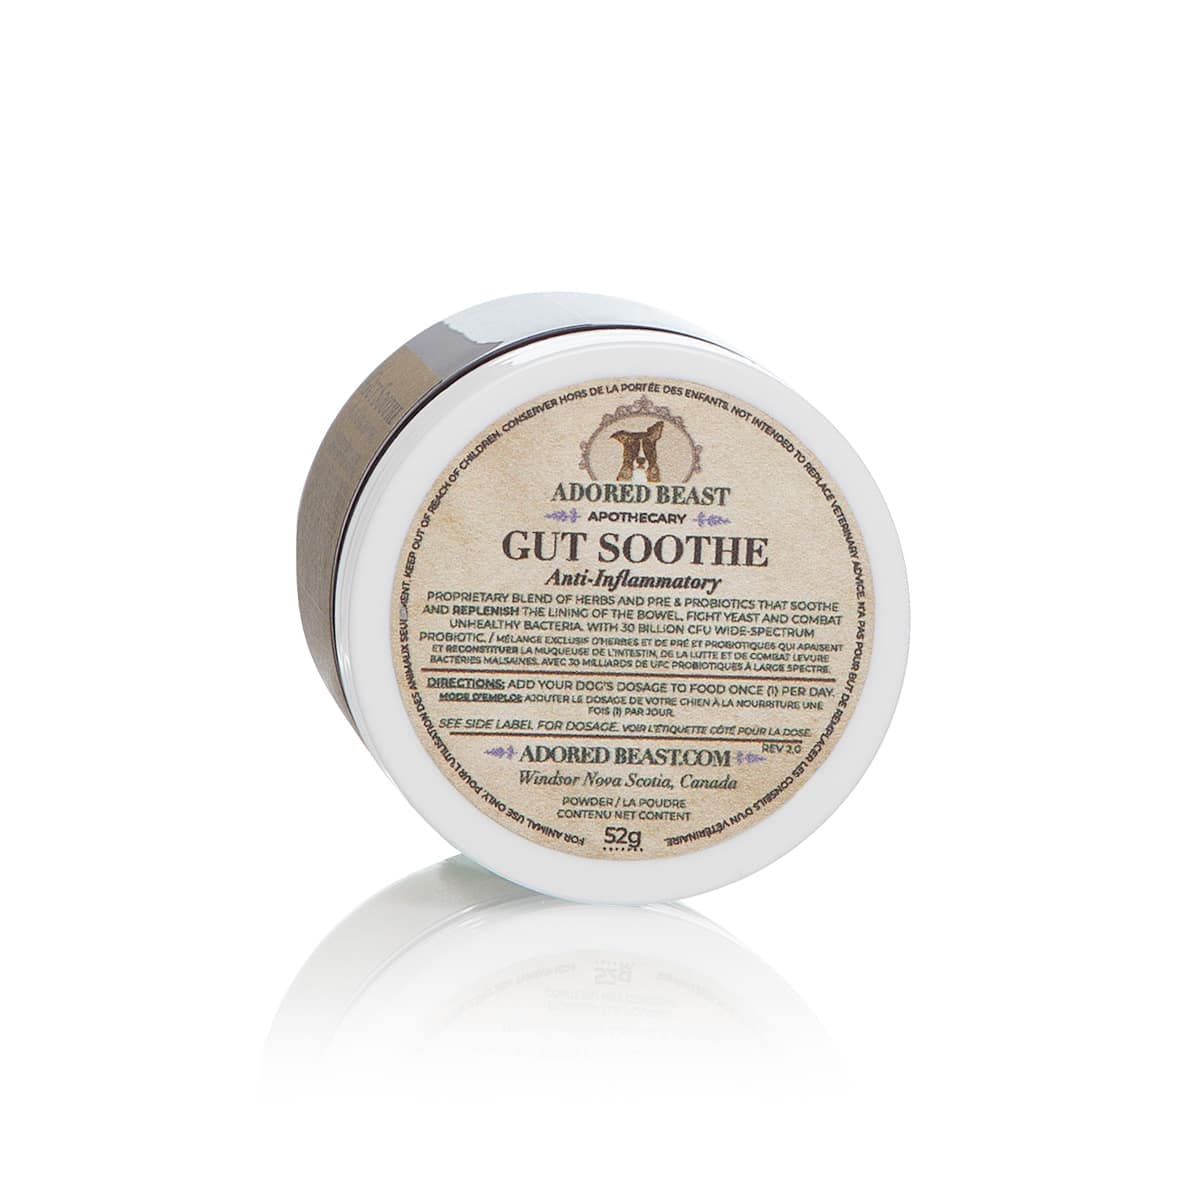 Gut Soothe - Adored Beast Apothecary